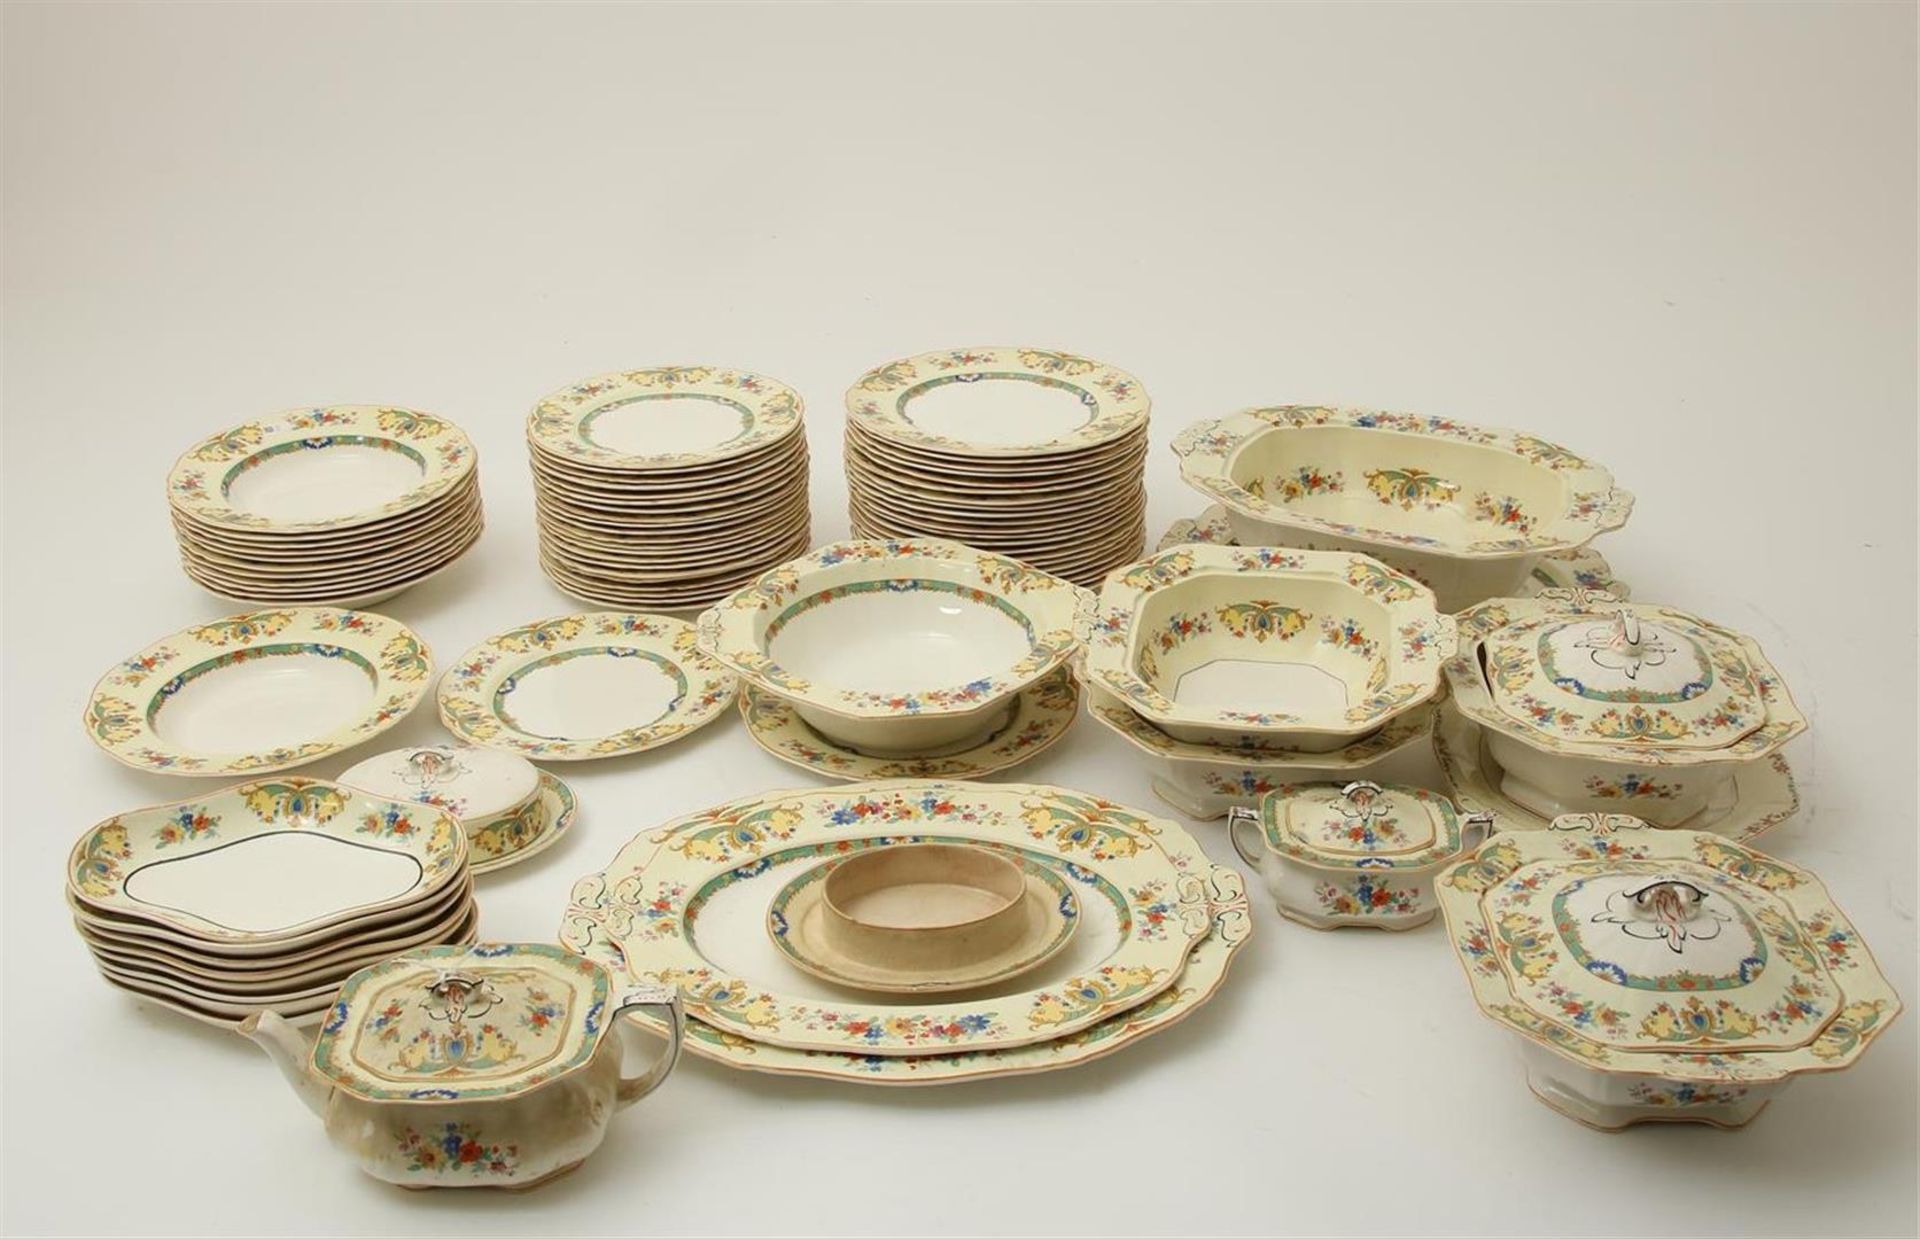 80 pieces of earthenware tableware with floral decorations, marked Alfred Meakin England, model